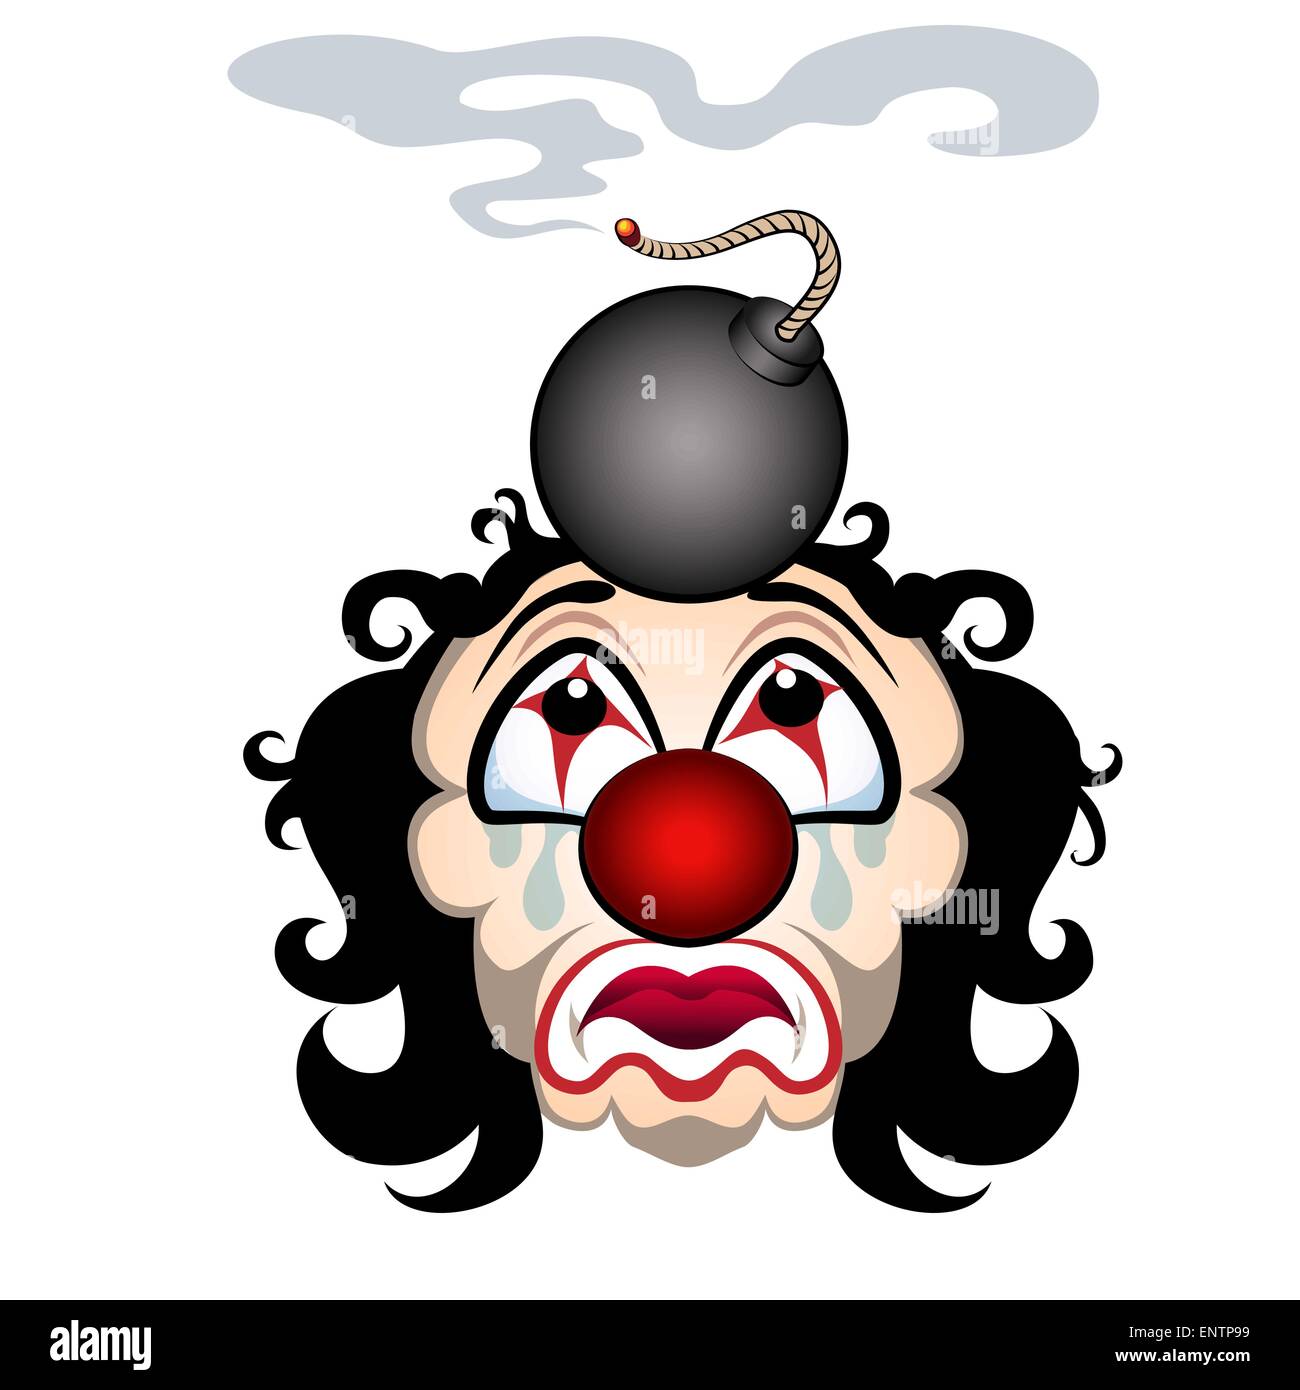 Comic illustration of the sad clown with the lit bomb on his head. Isolated on white background. Stock Vector